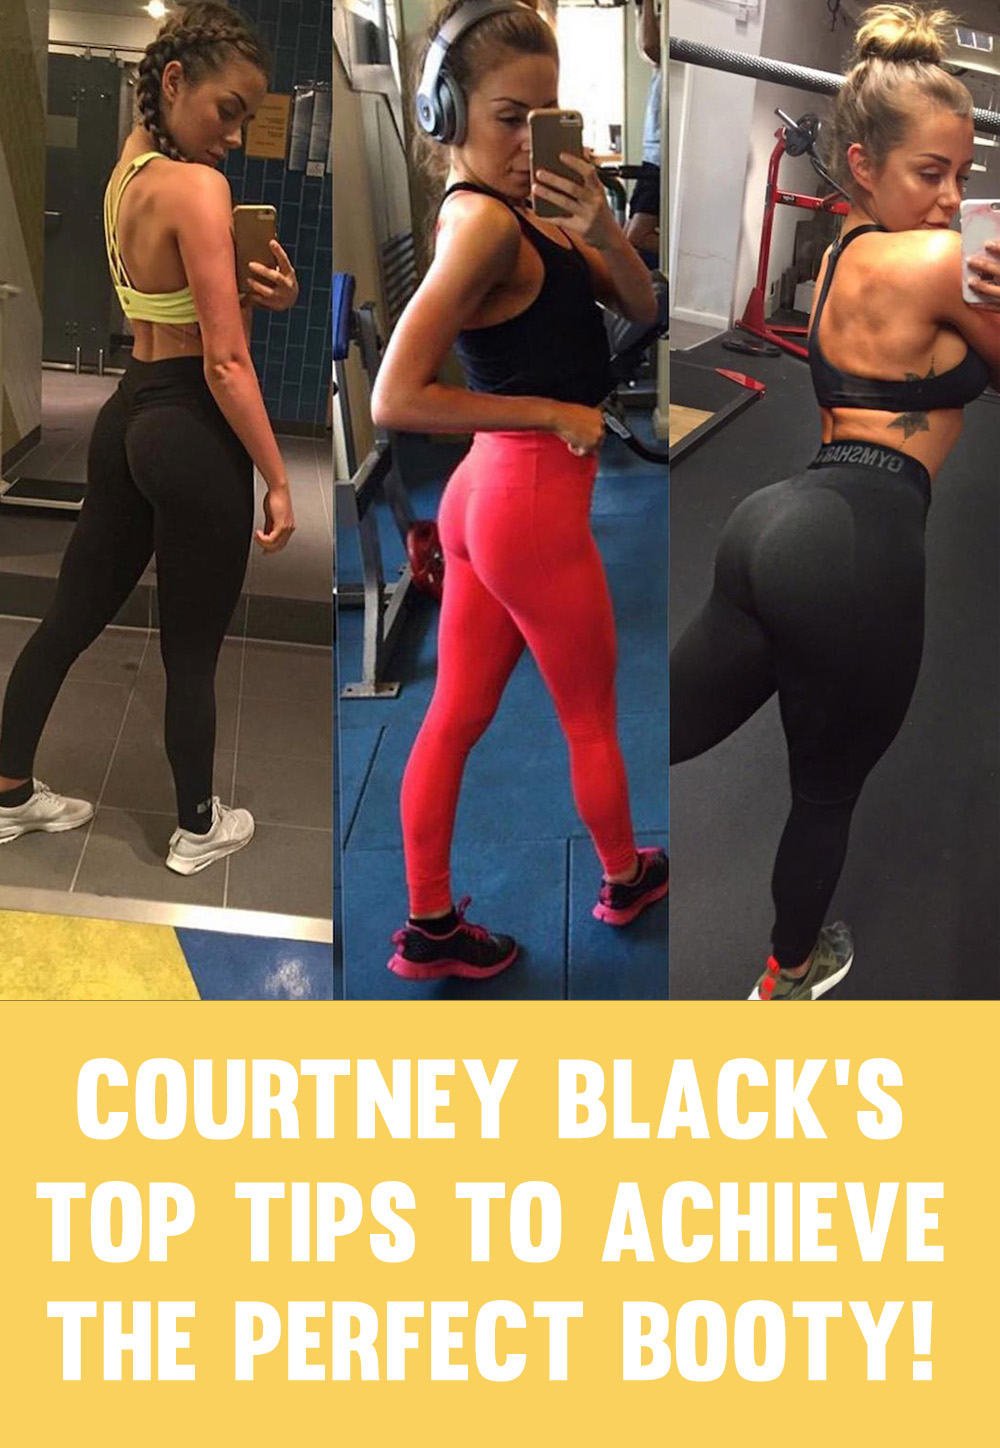 Courtney Black Glute Guide Sculpt Booty Gain Workout Guide PDF OFFICIAL FULL 